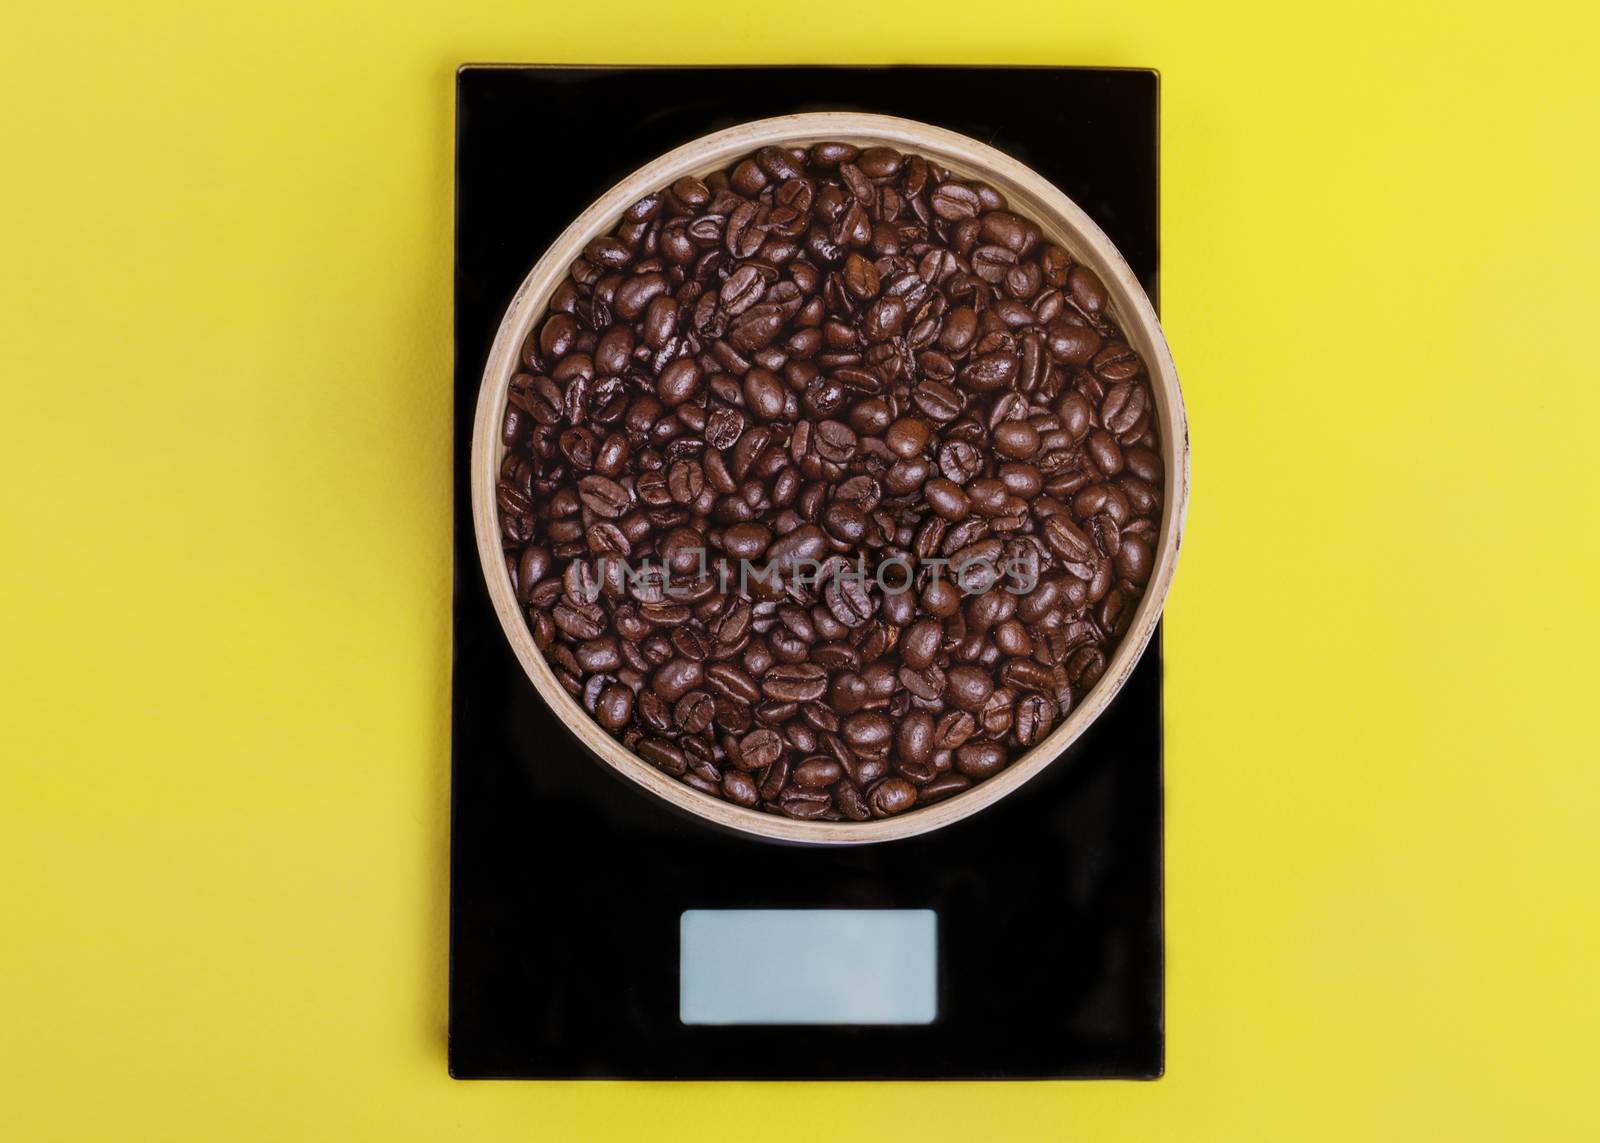 Wooden bowl with coffee beans on black scales on the yellow background.